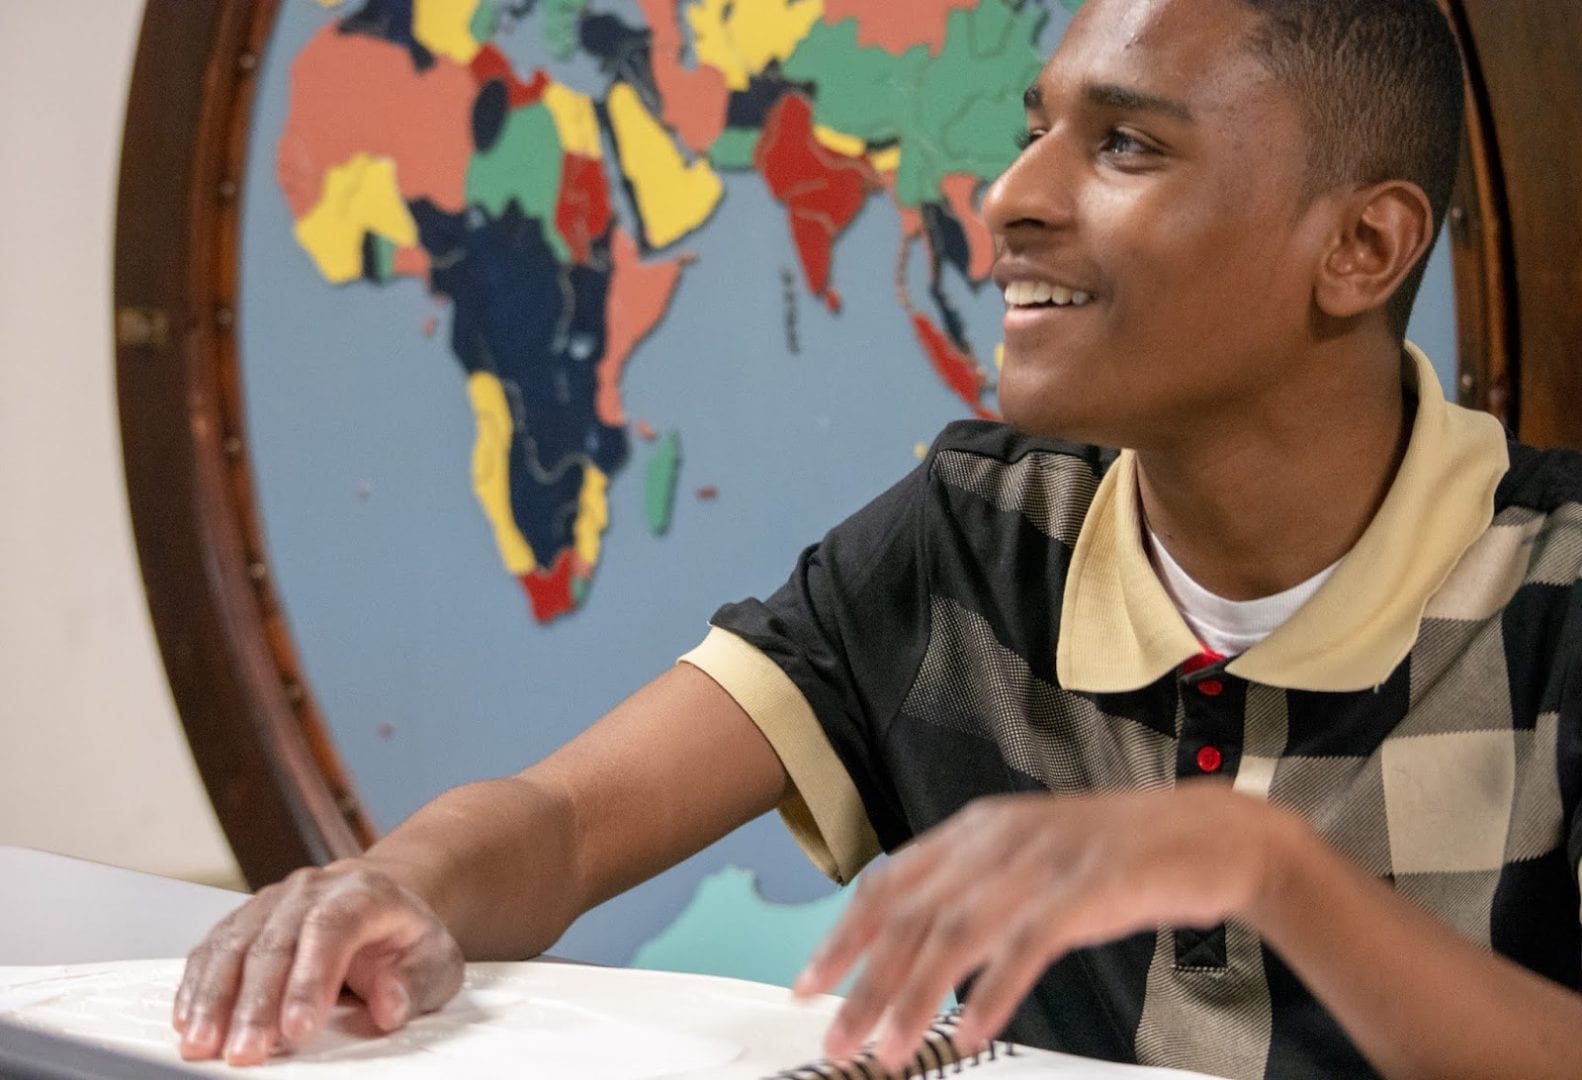 Teenage boy reading braille and smiling in front of a tactile map of the world